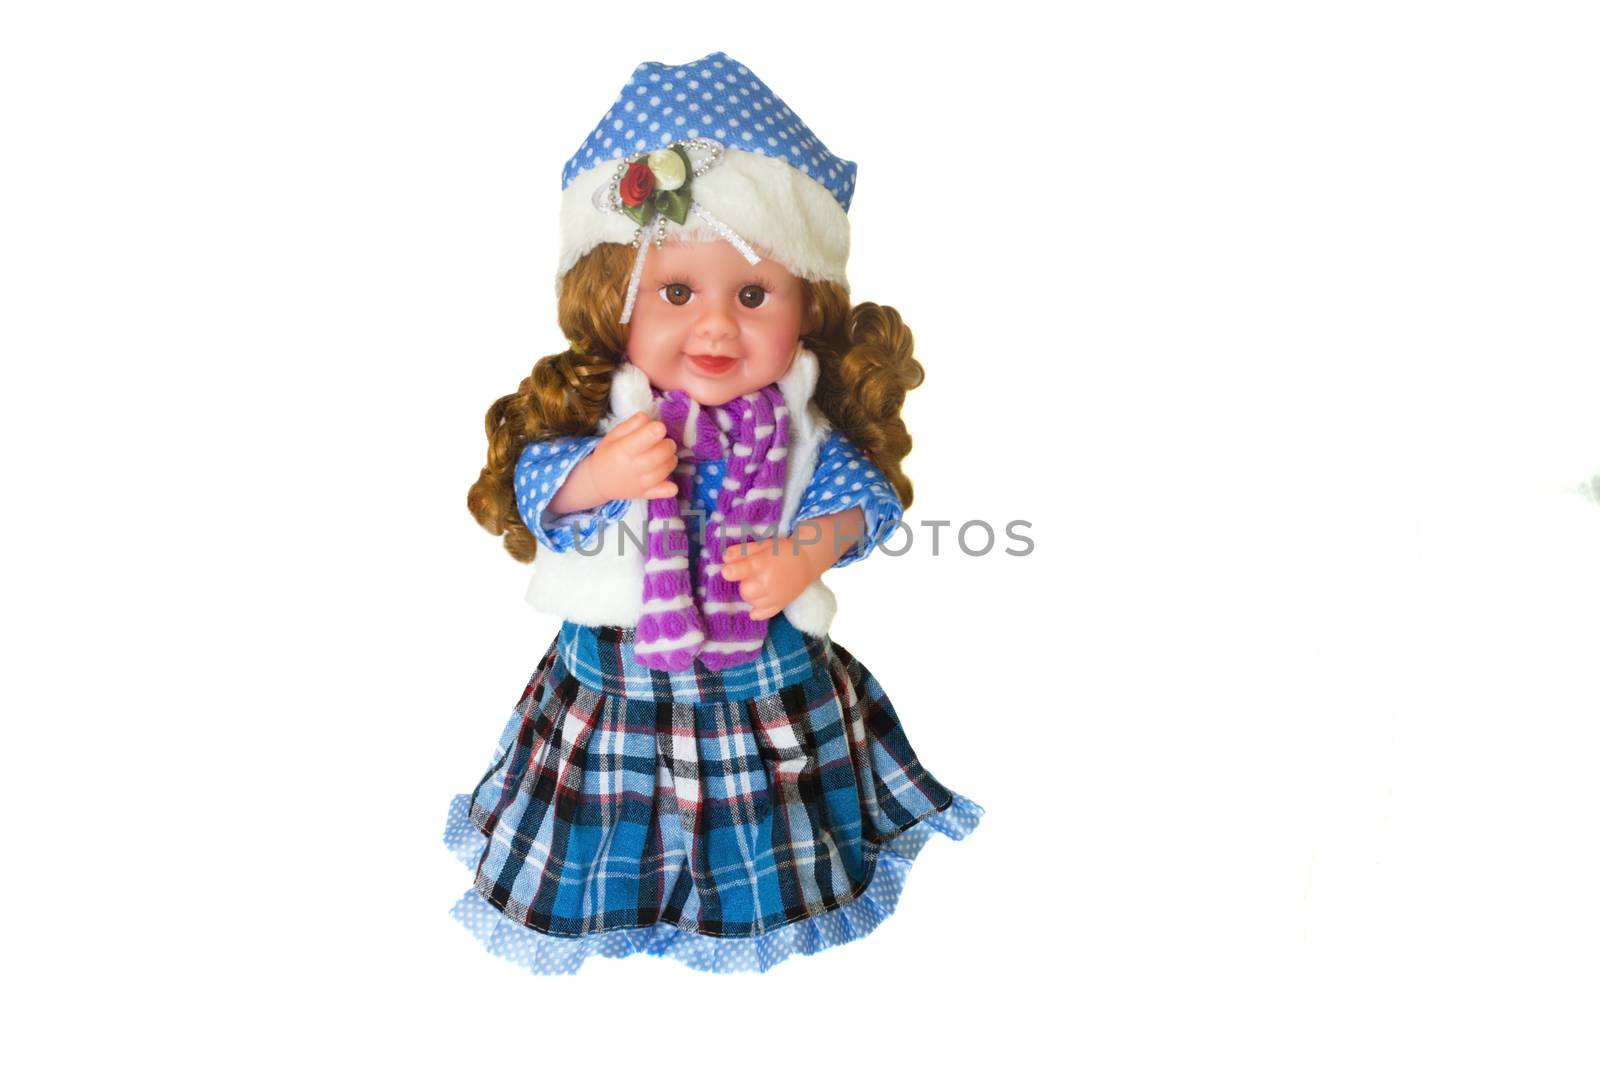 Toy for children - beautiful doll on a white background by georgina198